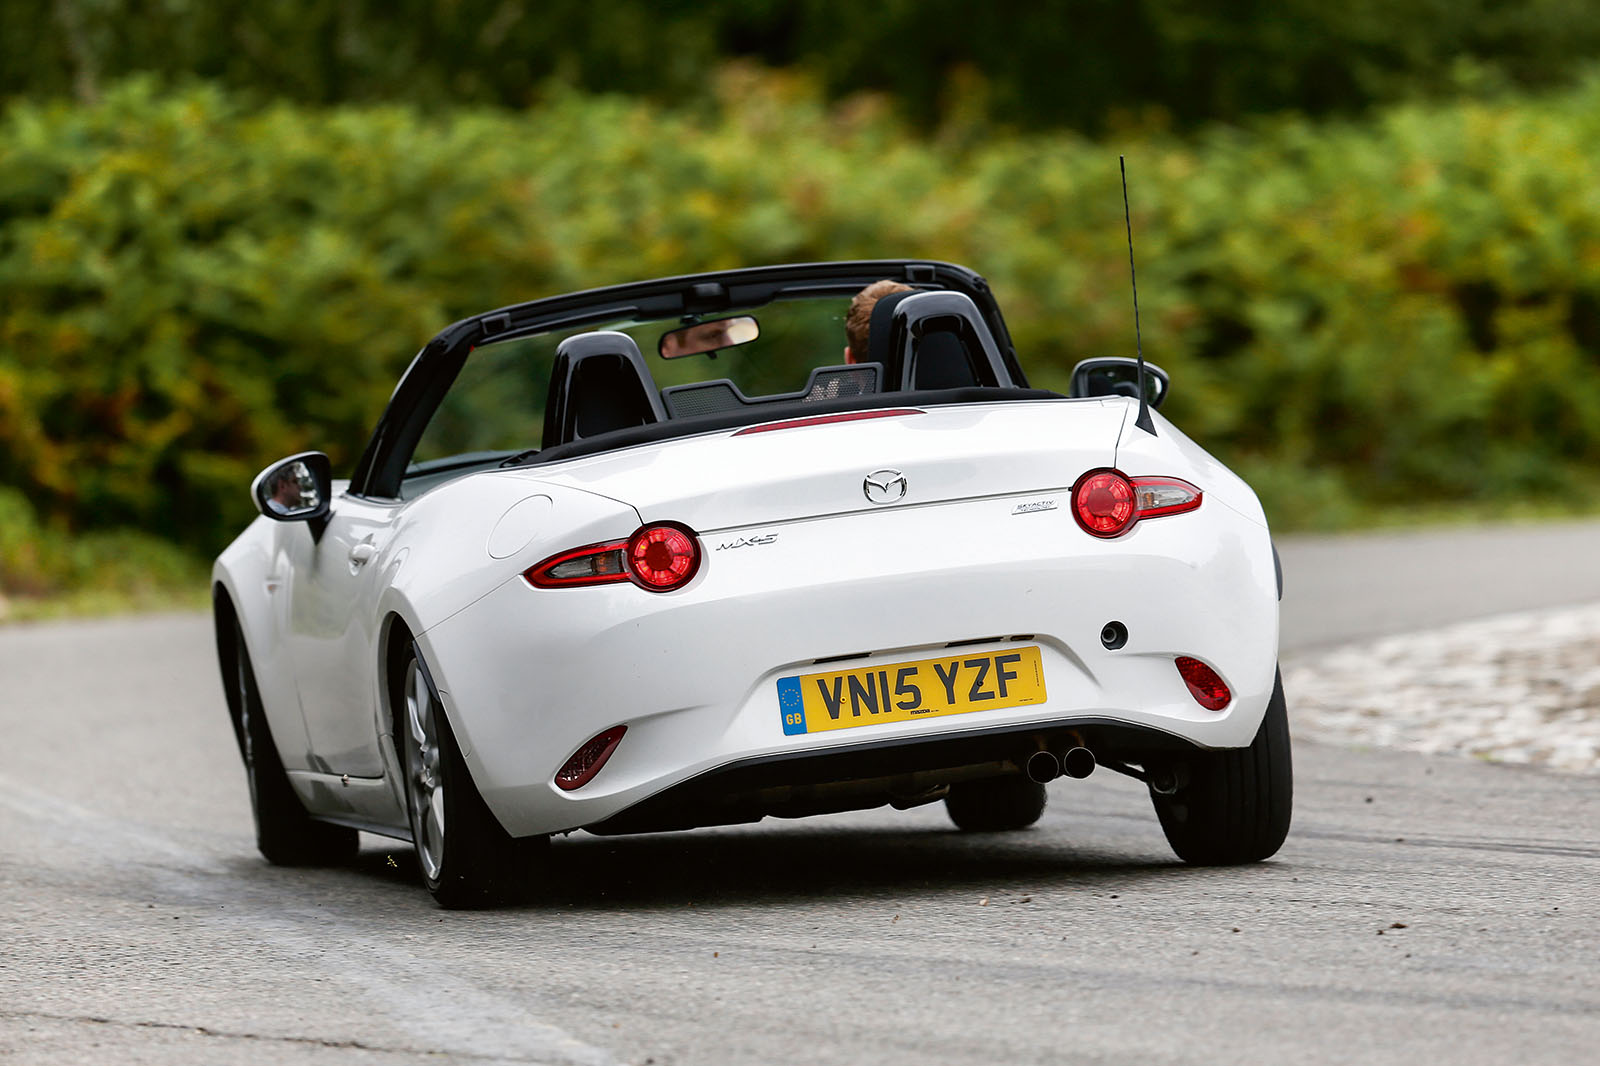 The Mazda MX-5's ride is delicate and perfectly balanced, although the ride lacks the original's fluency